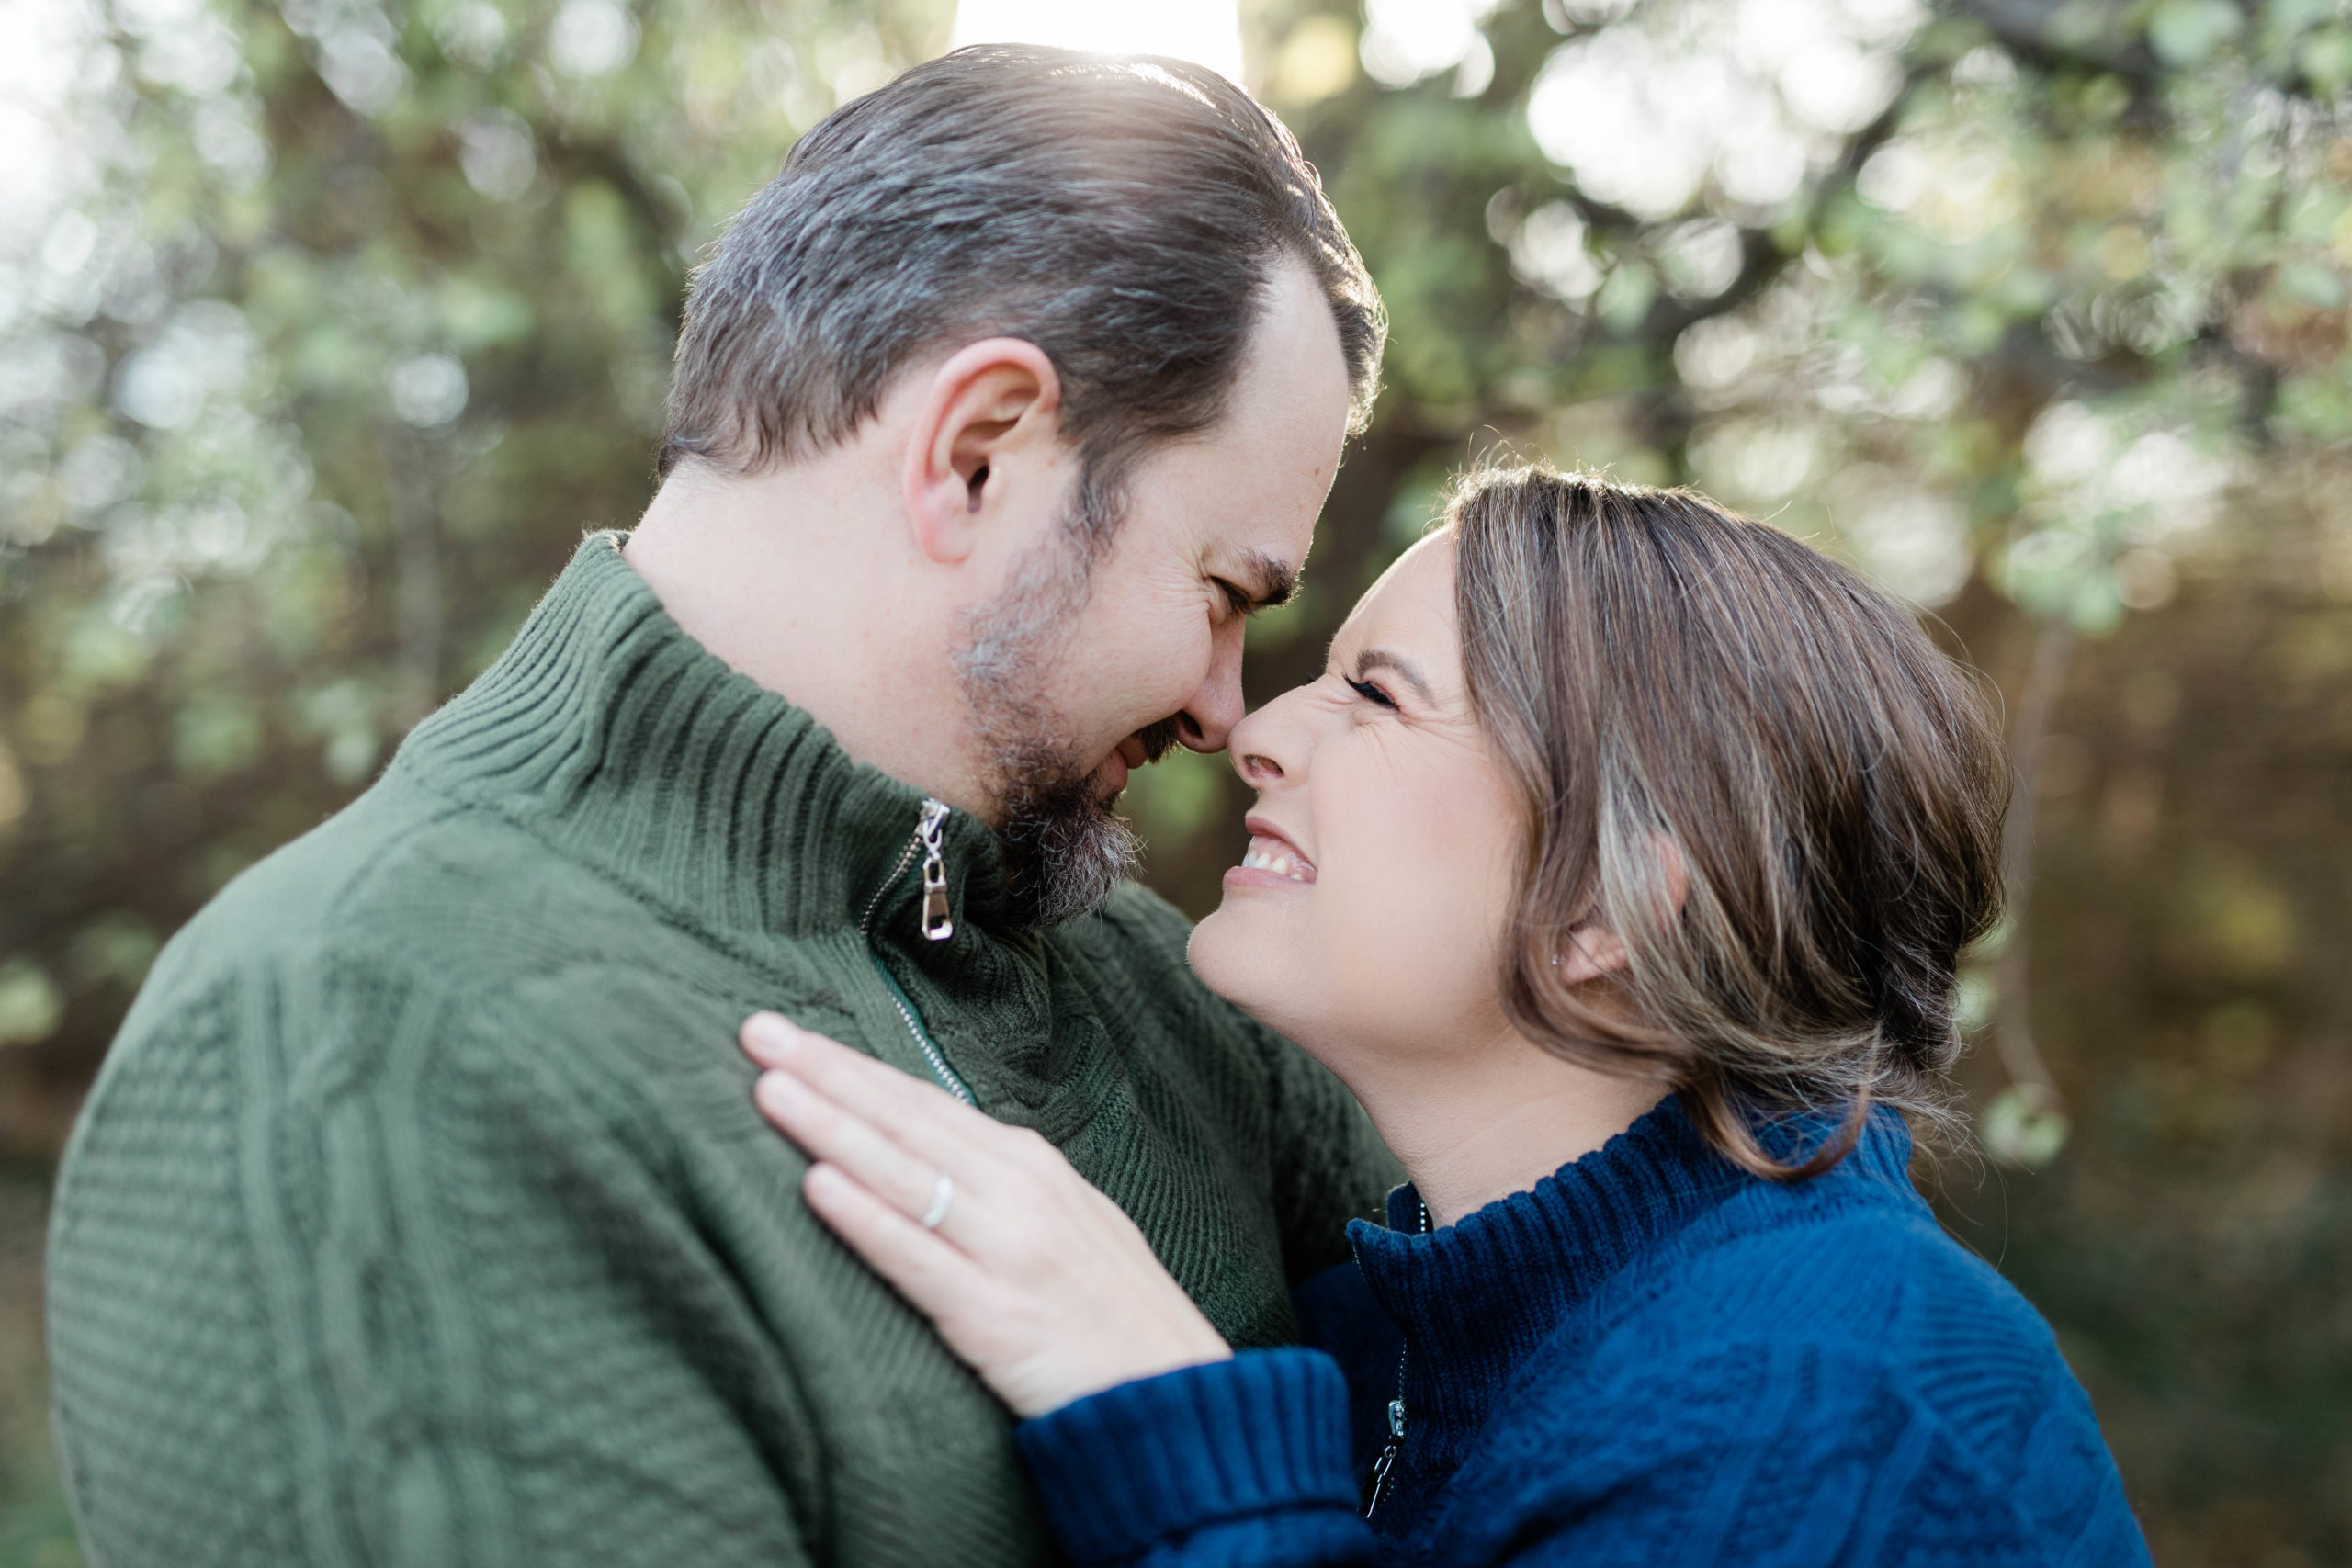 Boise wedding photographer captures woman smiling at man while noses are pressed together